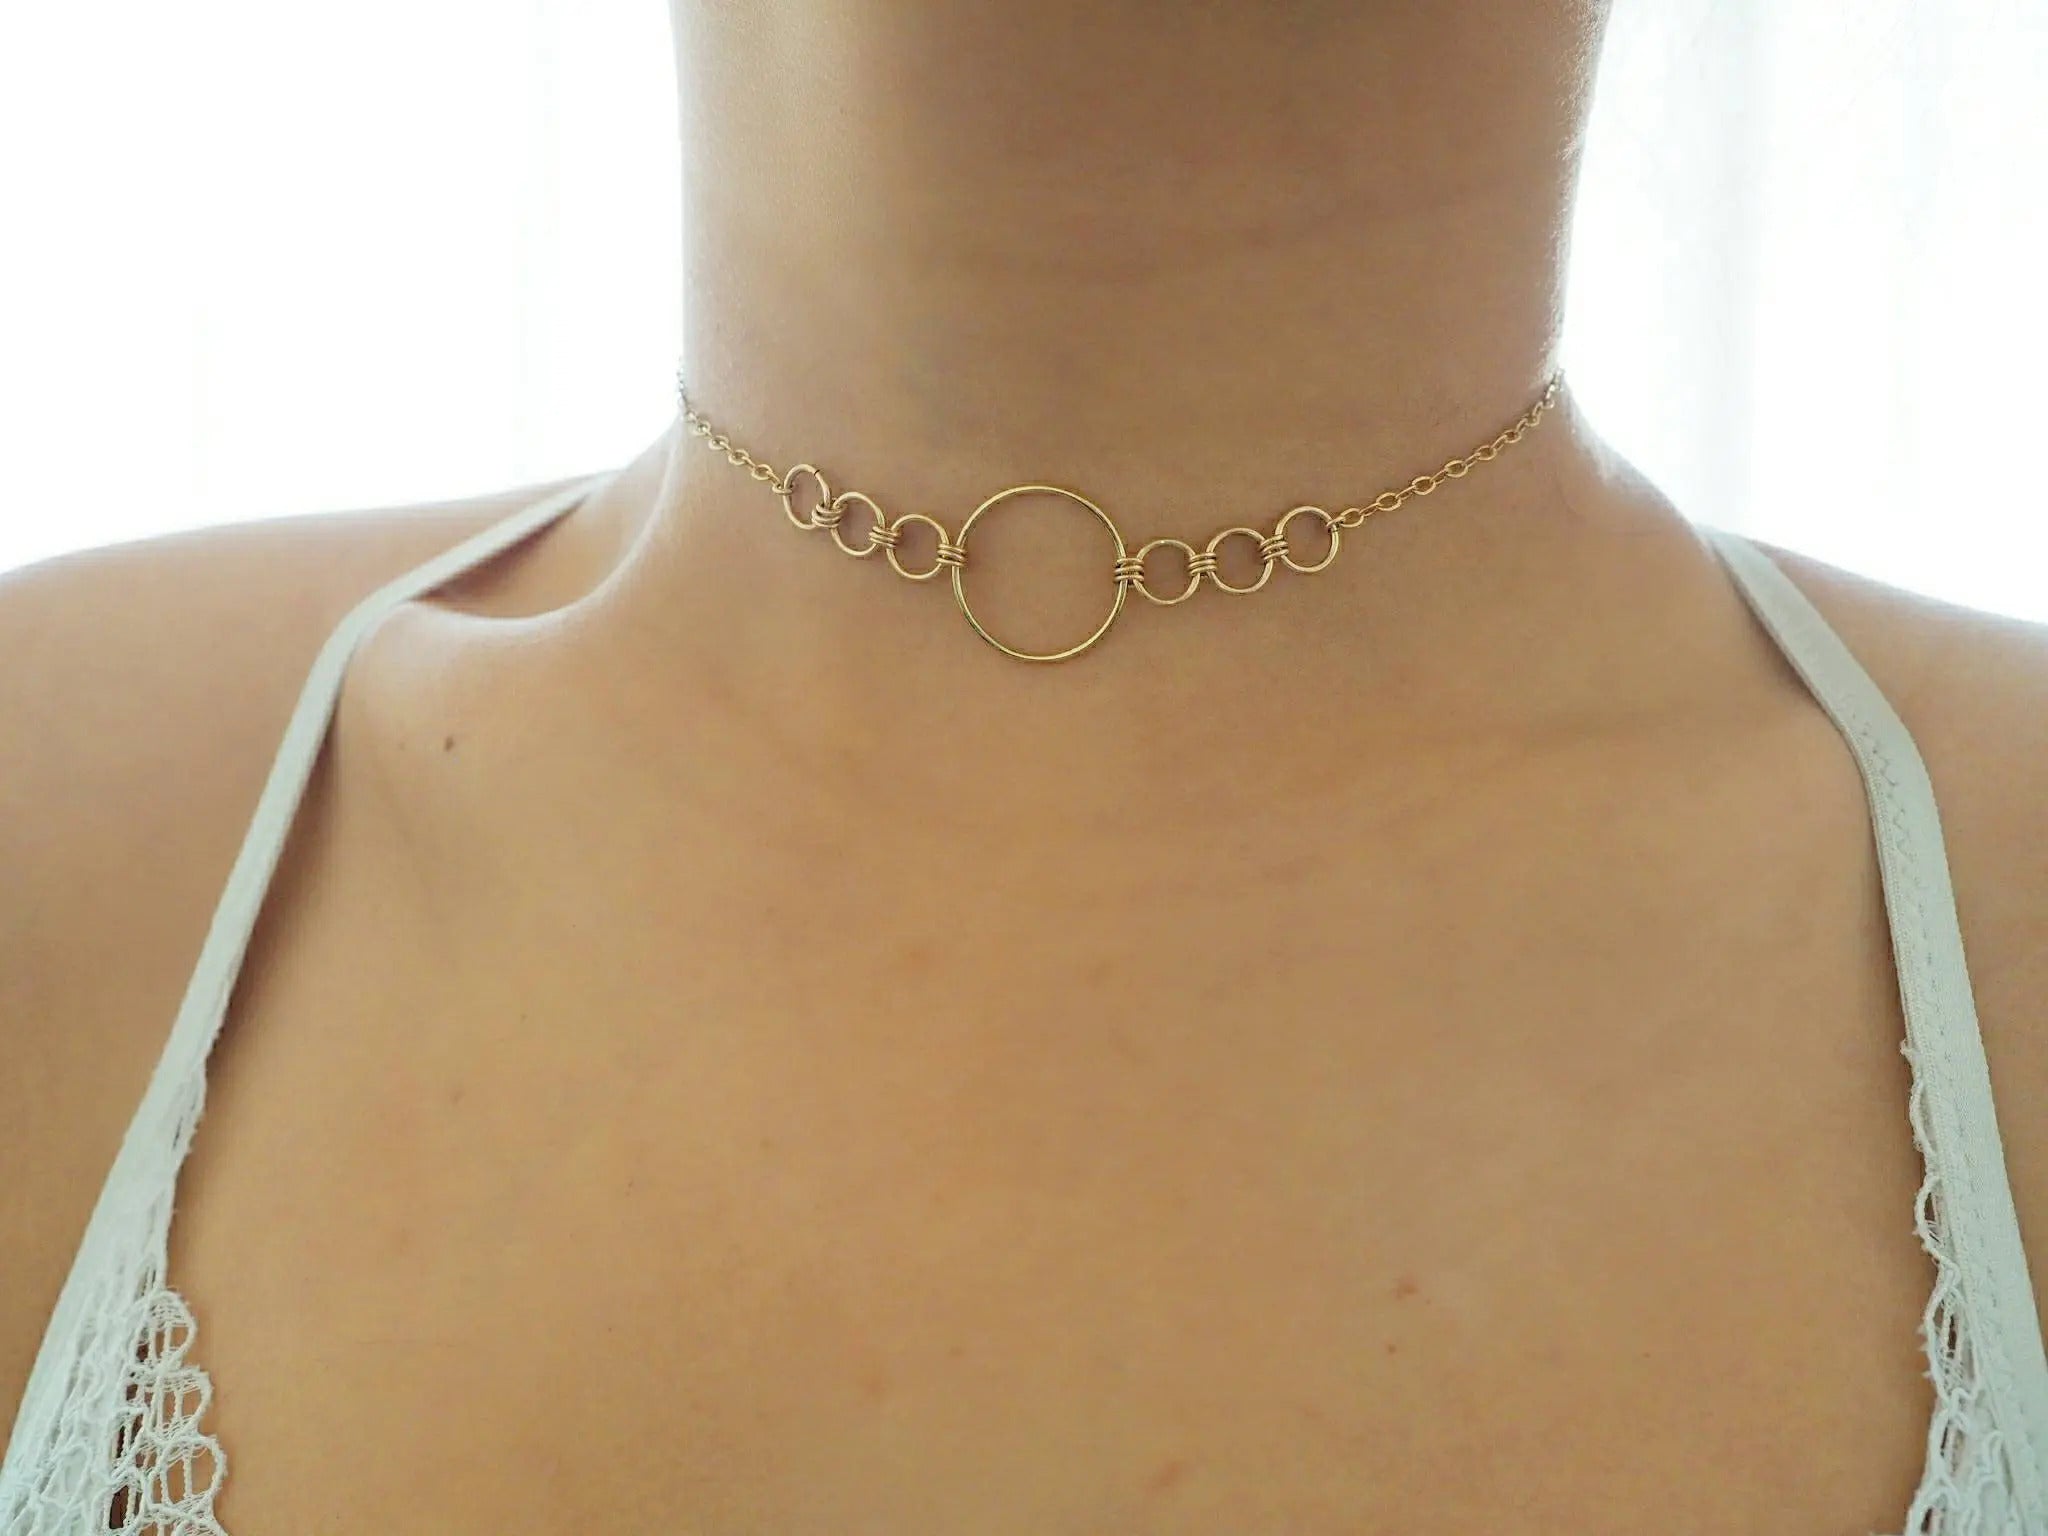 Body Chains – DianaHoDesigns